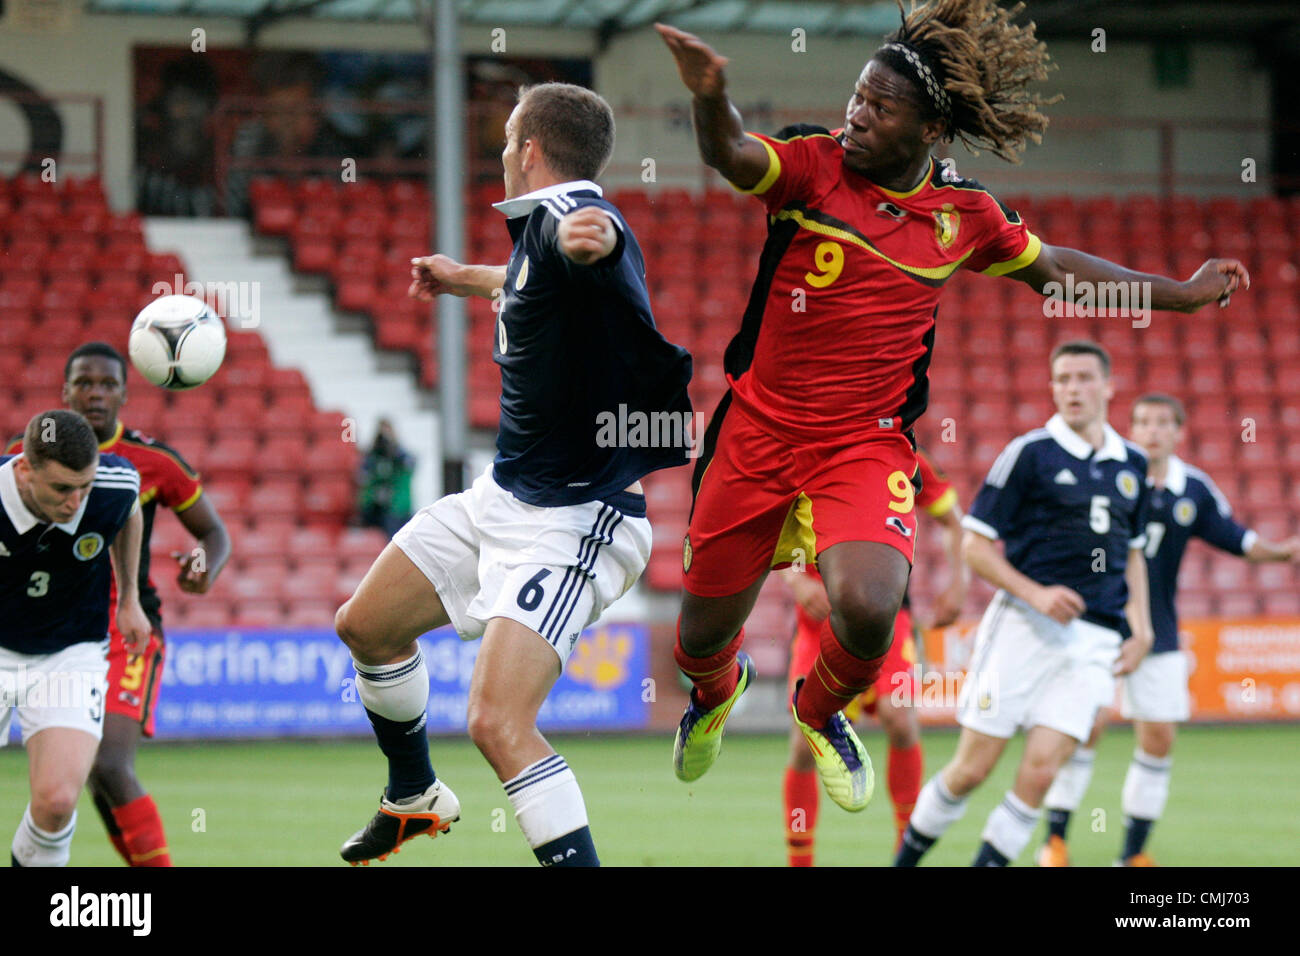 14th Aug 2012. 14.08.2012 Dunfermline, Scotland. 6 Liam Kelly and 9 Ziggy Badibanga in action during the Vauxhall Under-21 International Challenge Match betweenScotland and Belgium at East End Park. Stock Photo